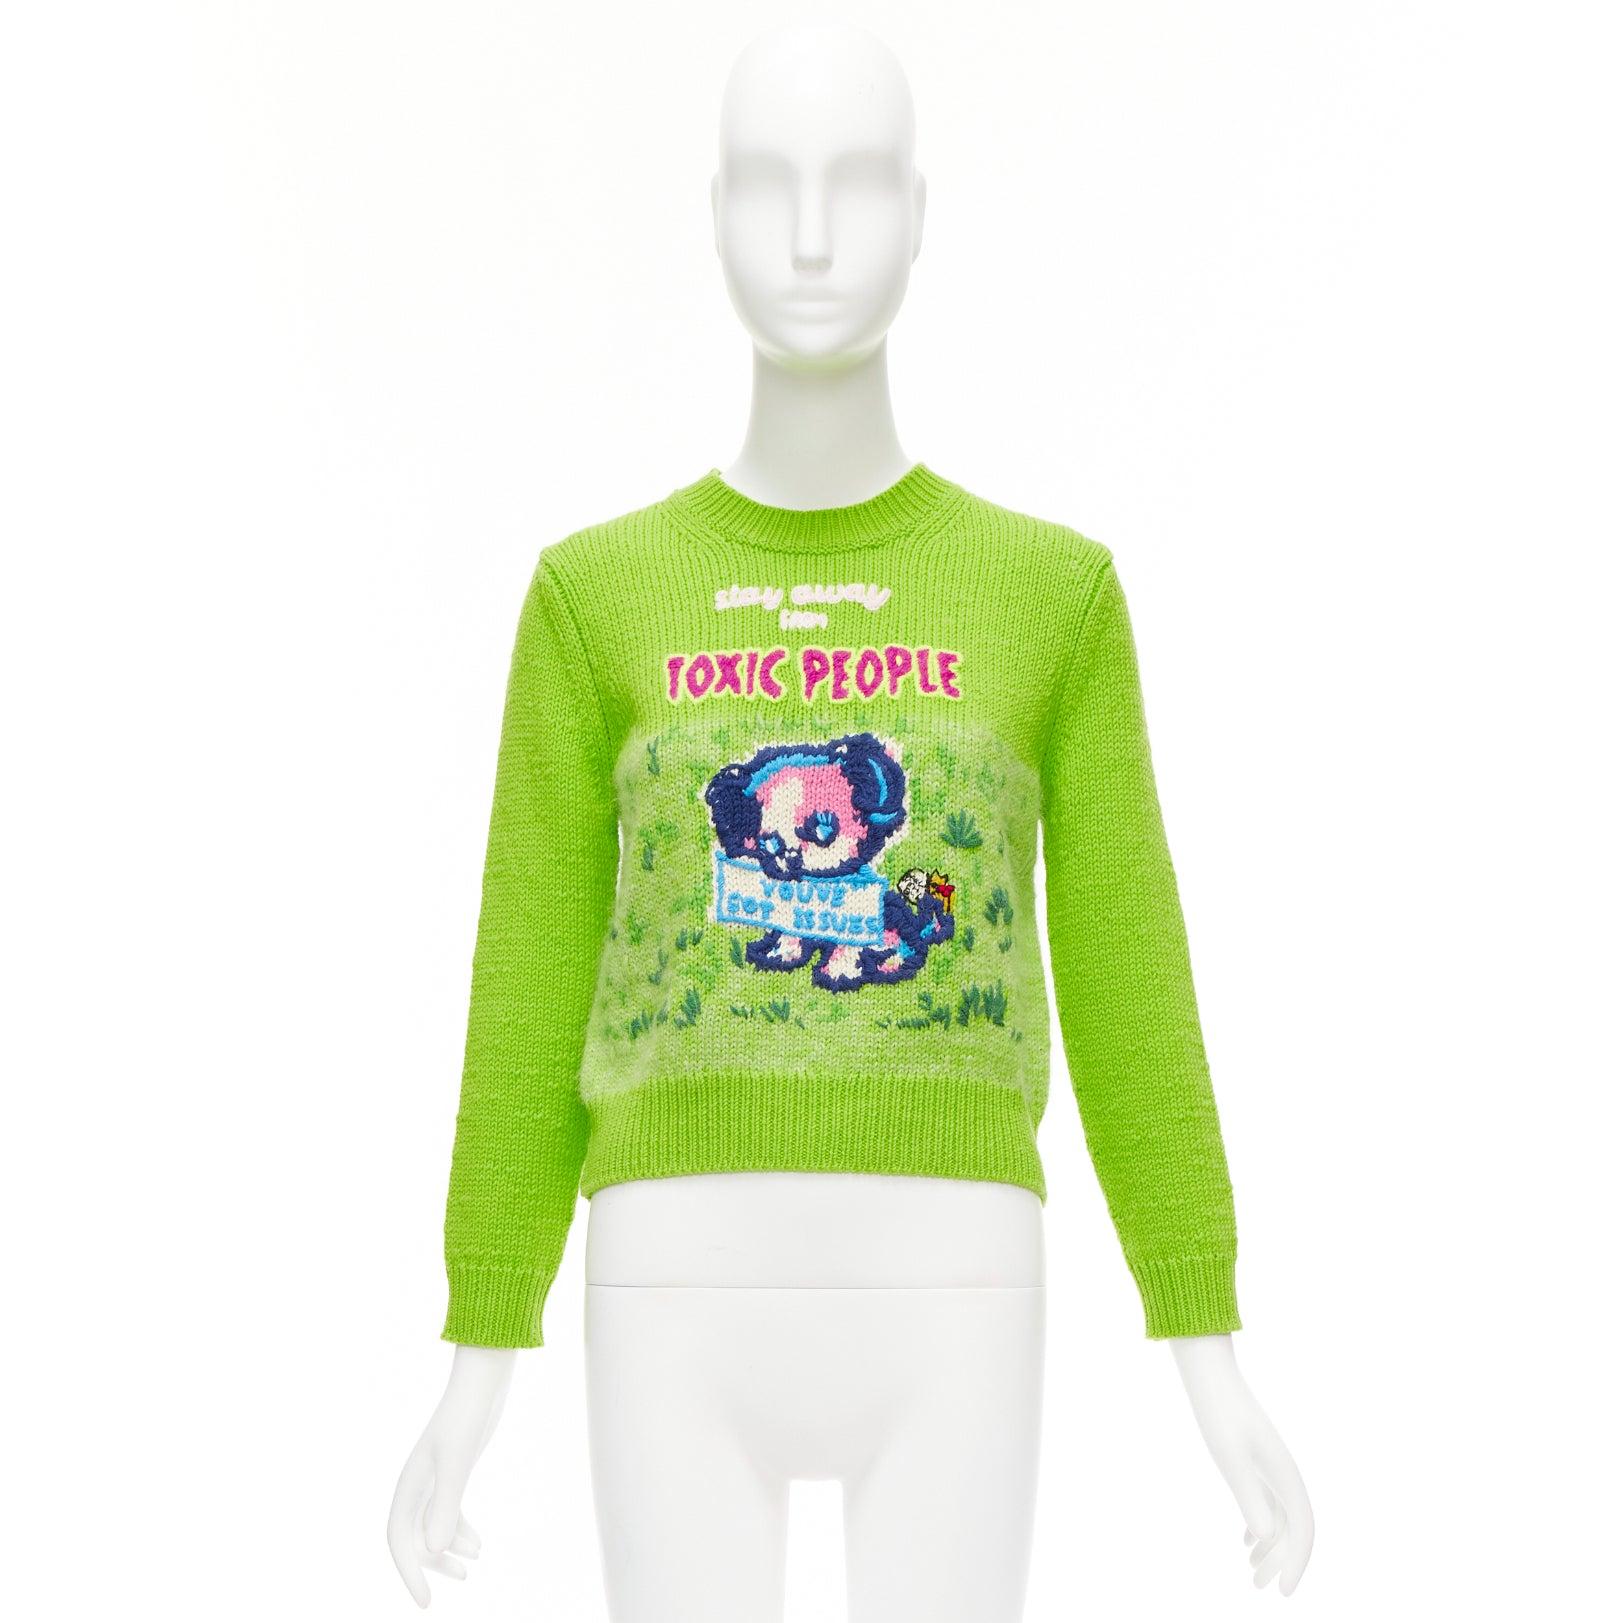 MARC JACOBS Magda Archer lime green Toxic People intarsia cropped sweater XS For Sale 5